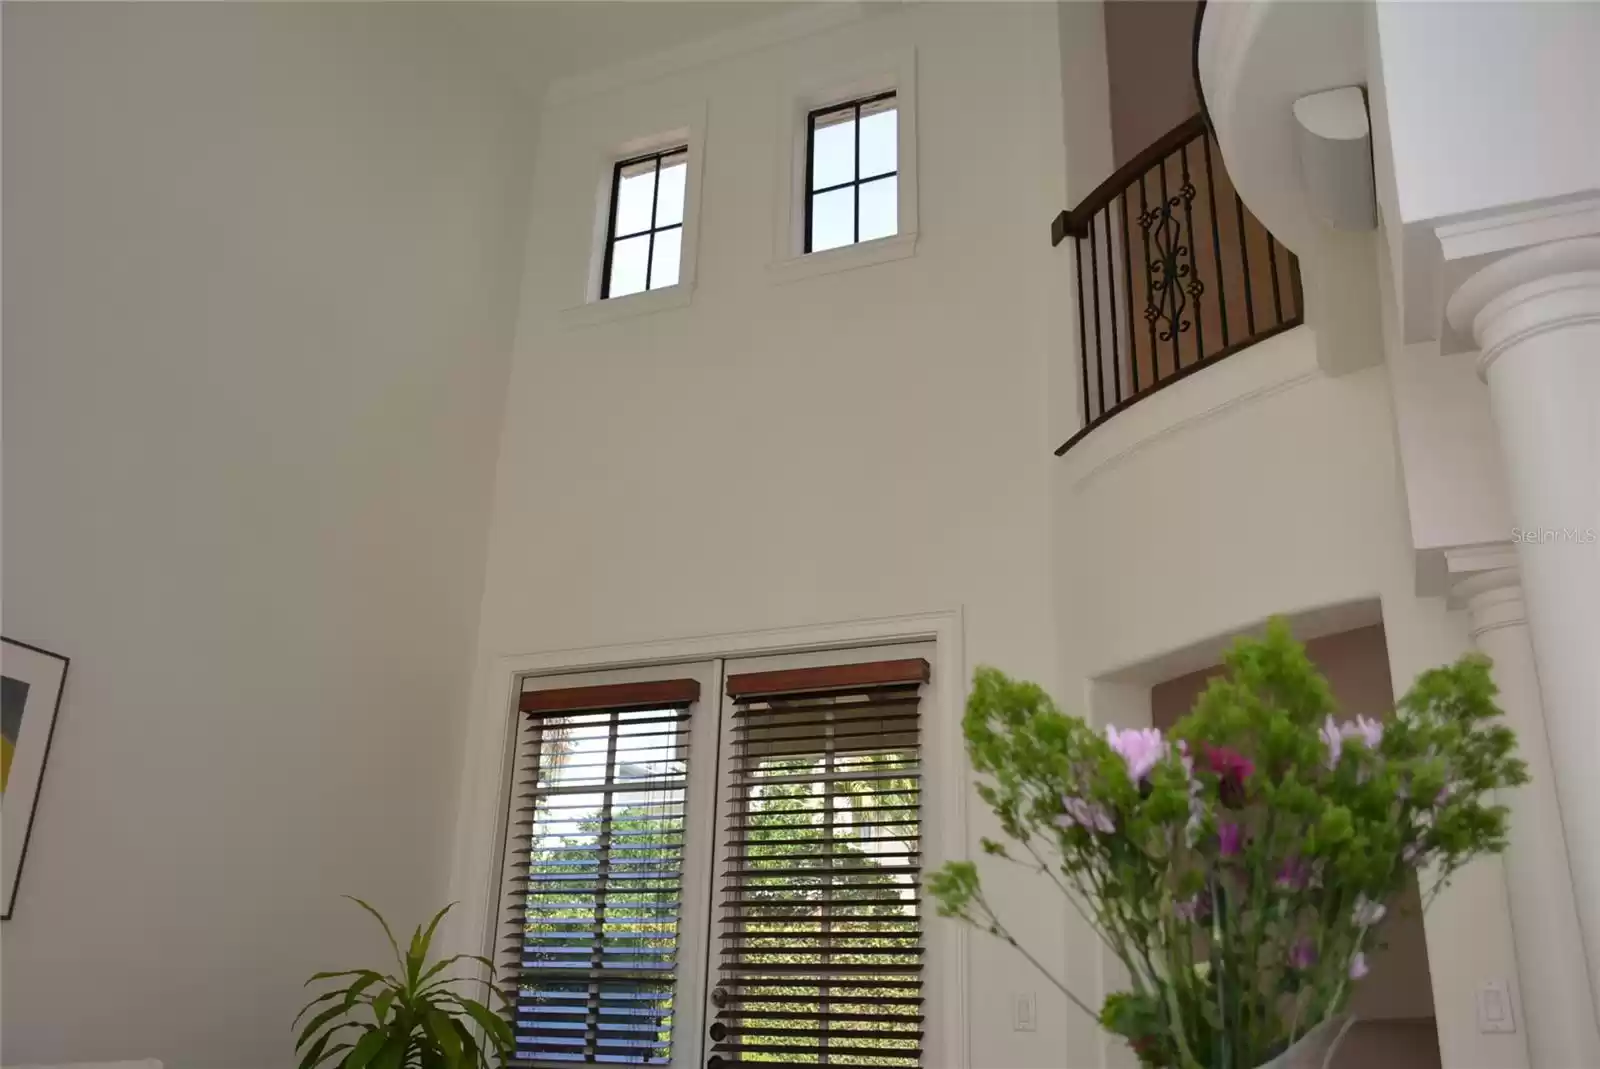 Windows on the front of the house allow additional natural light.